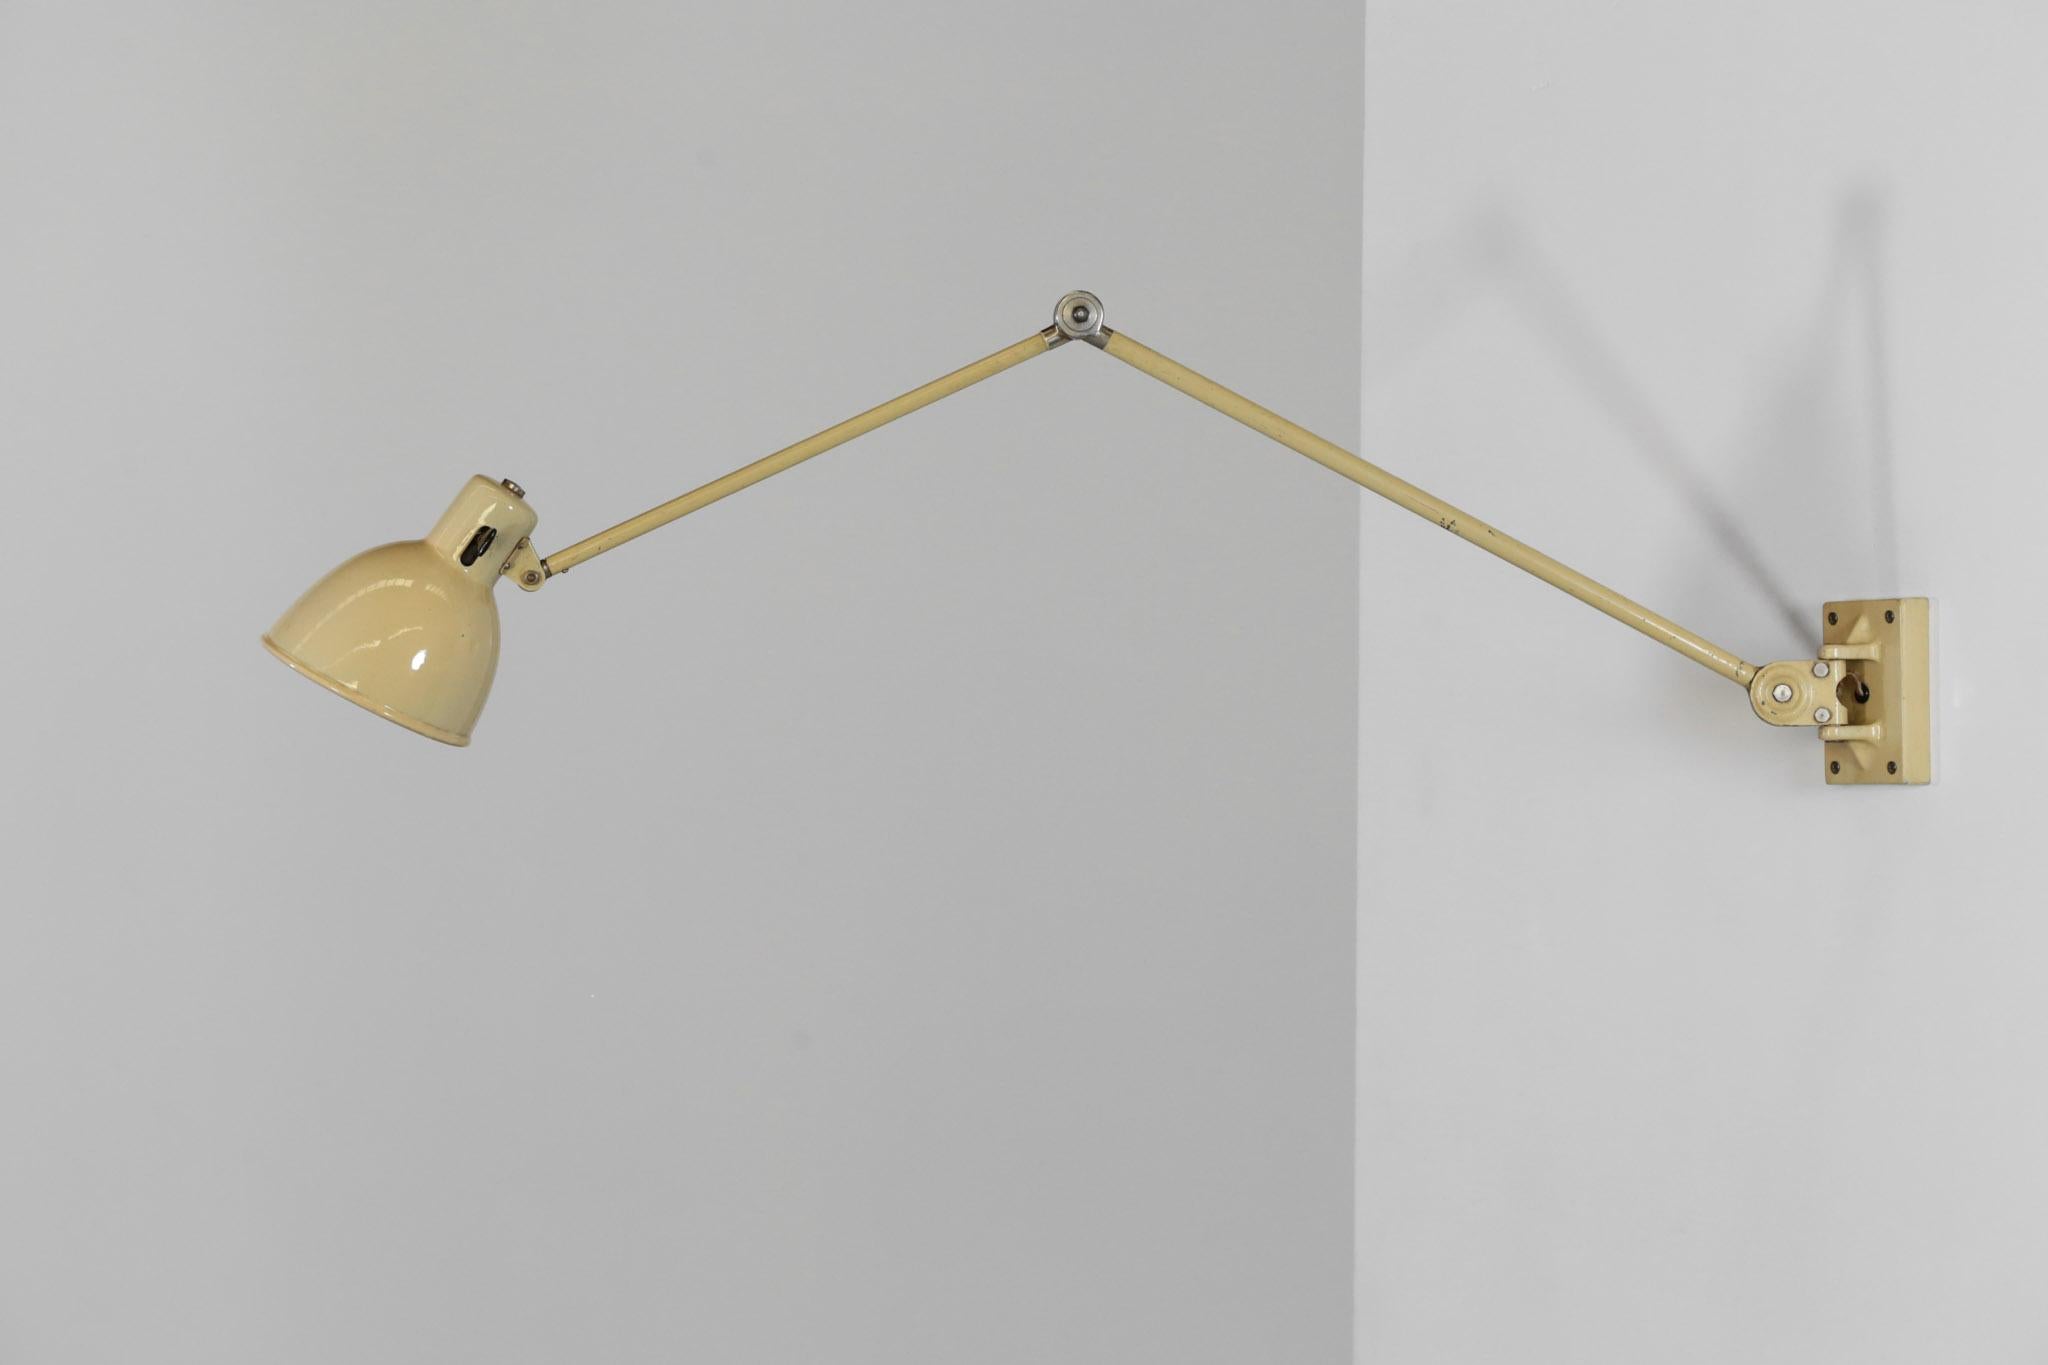 Large wall light from 1960s designed by Switzerland Workshop Bag Turgi.
Articulated lamp made of metal.